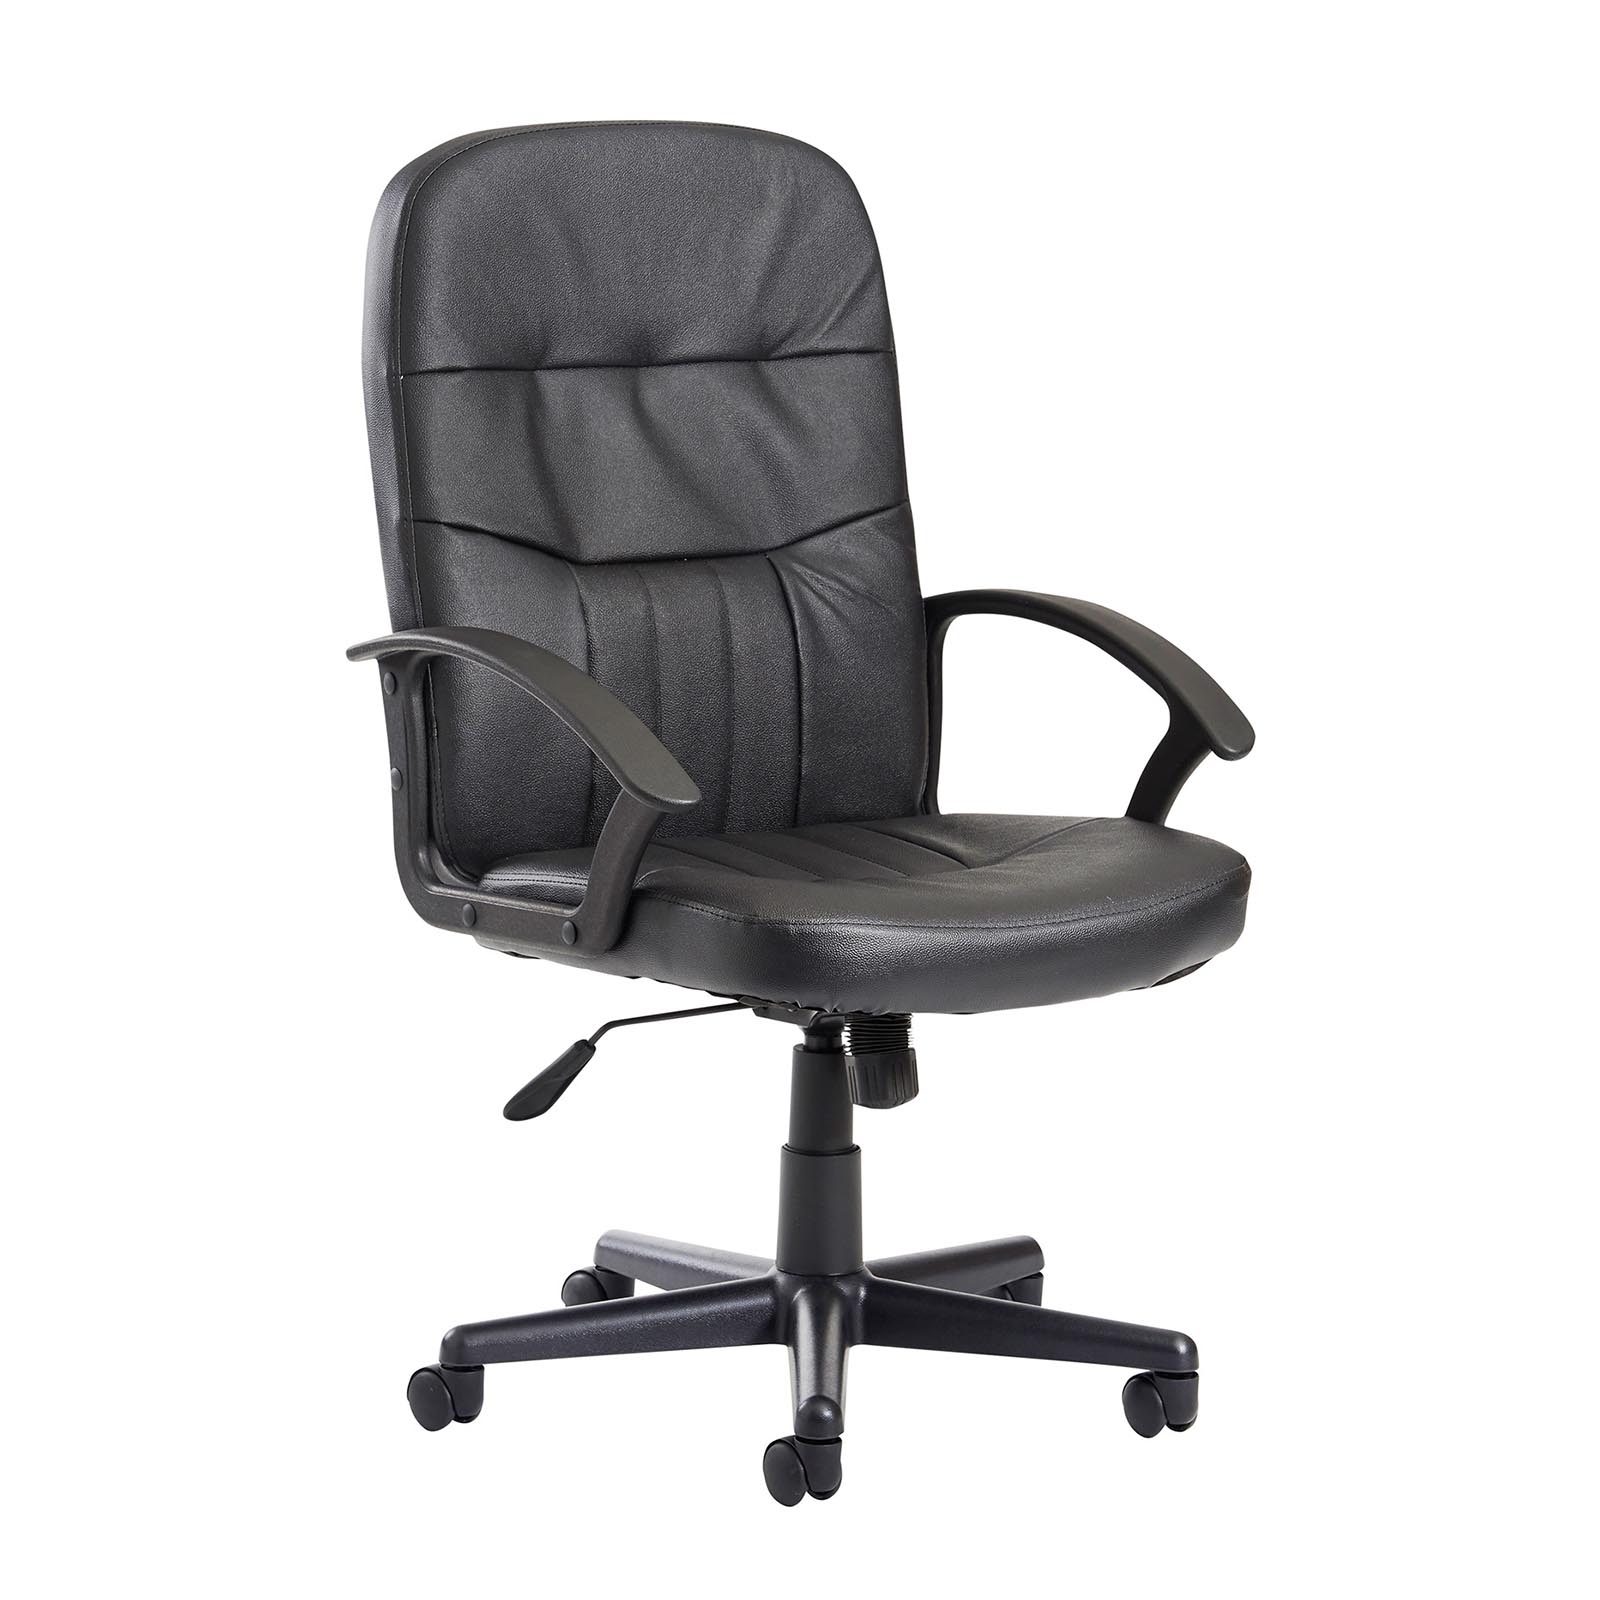 Cavalier Managers Chair - Black Leather Faced